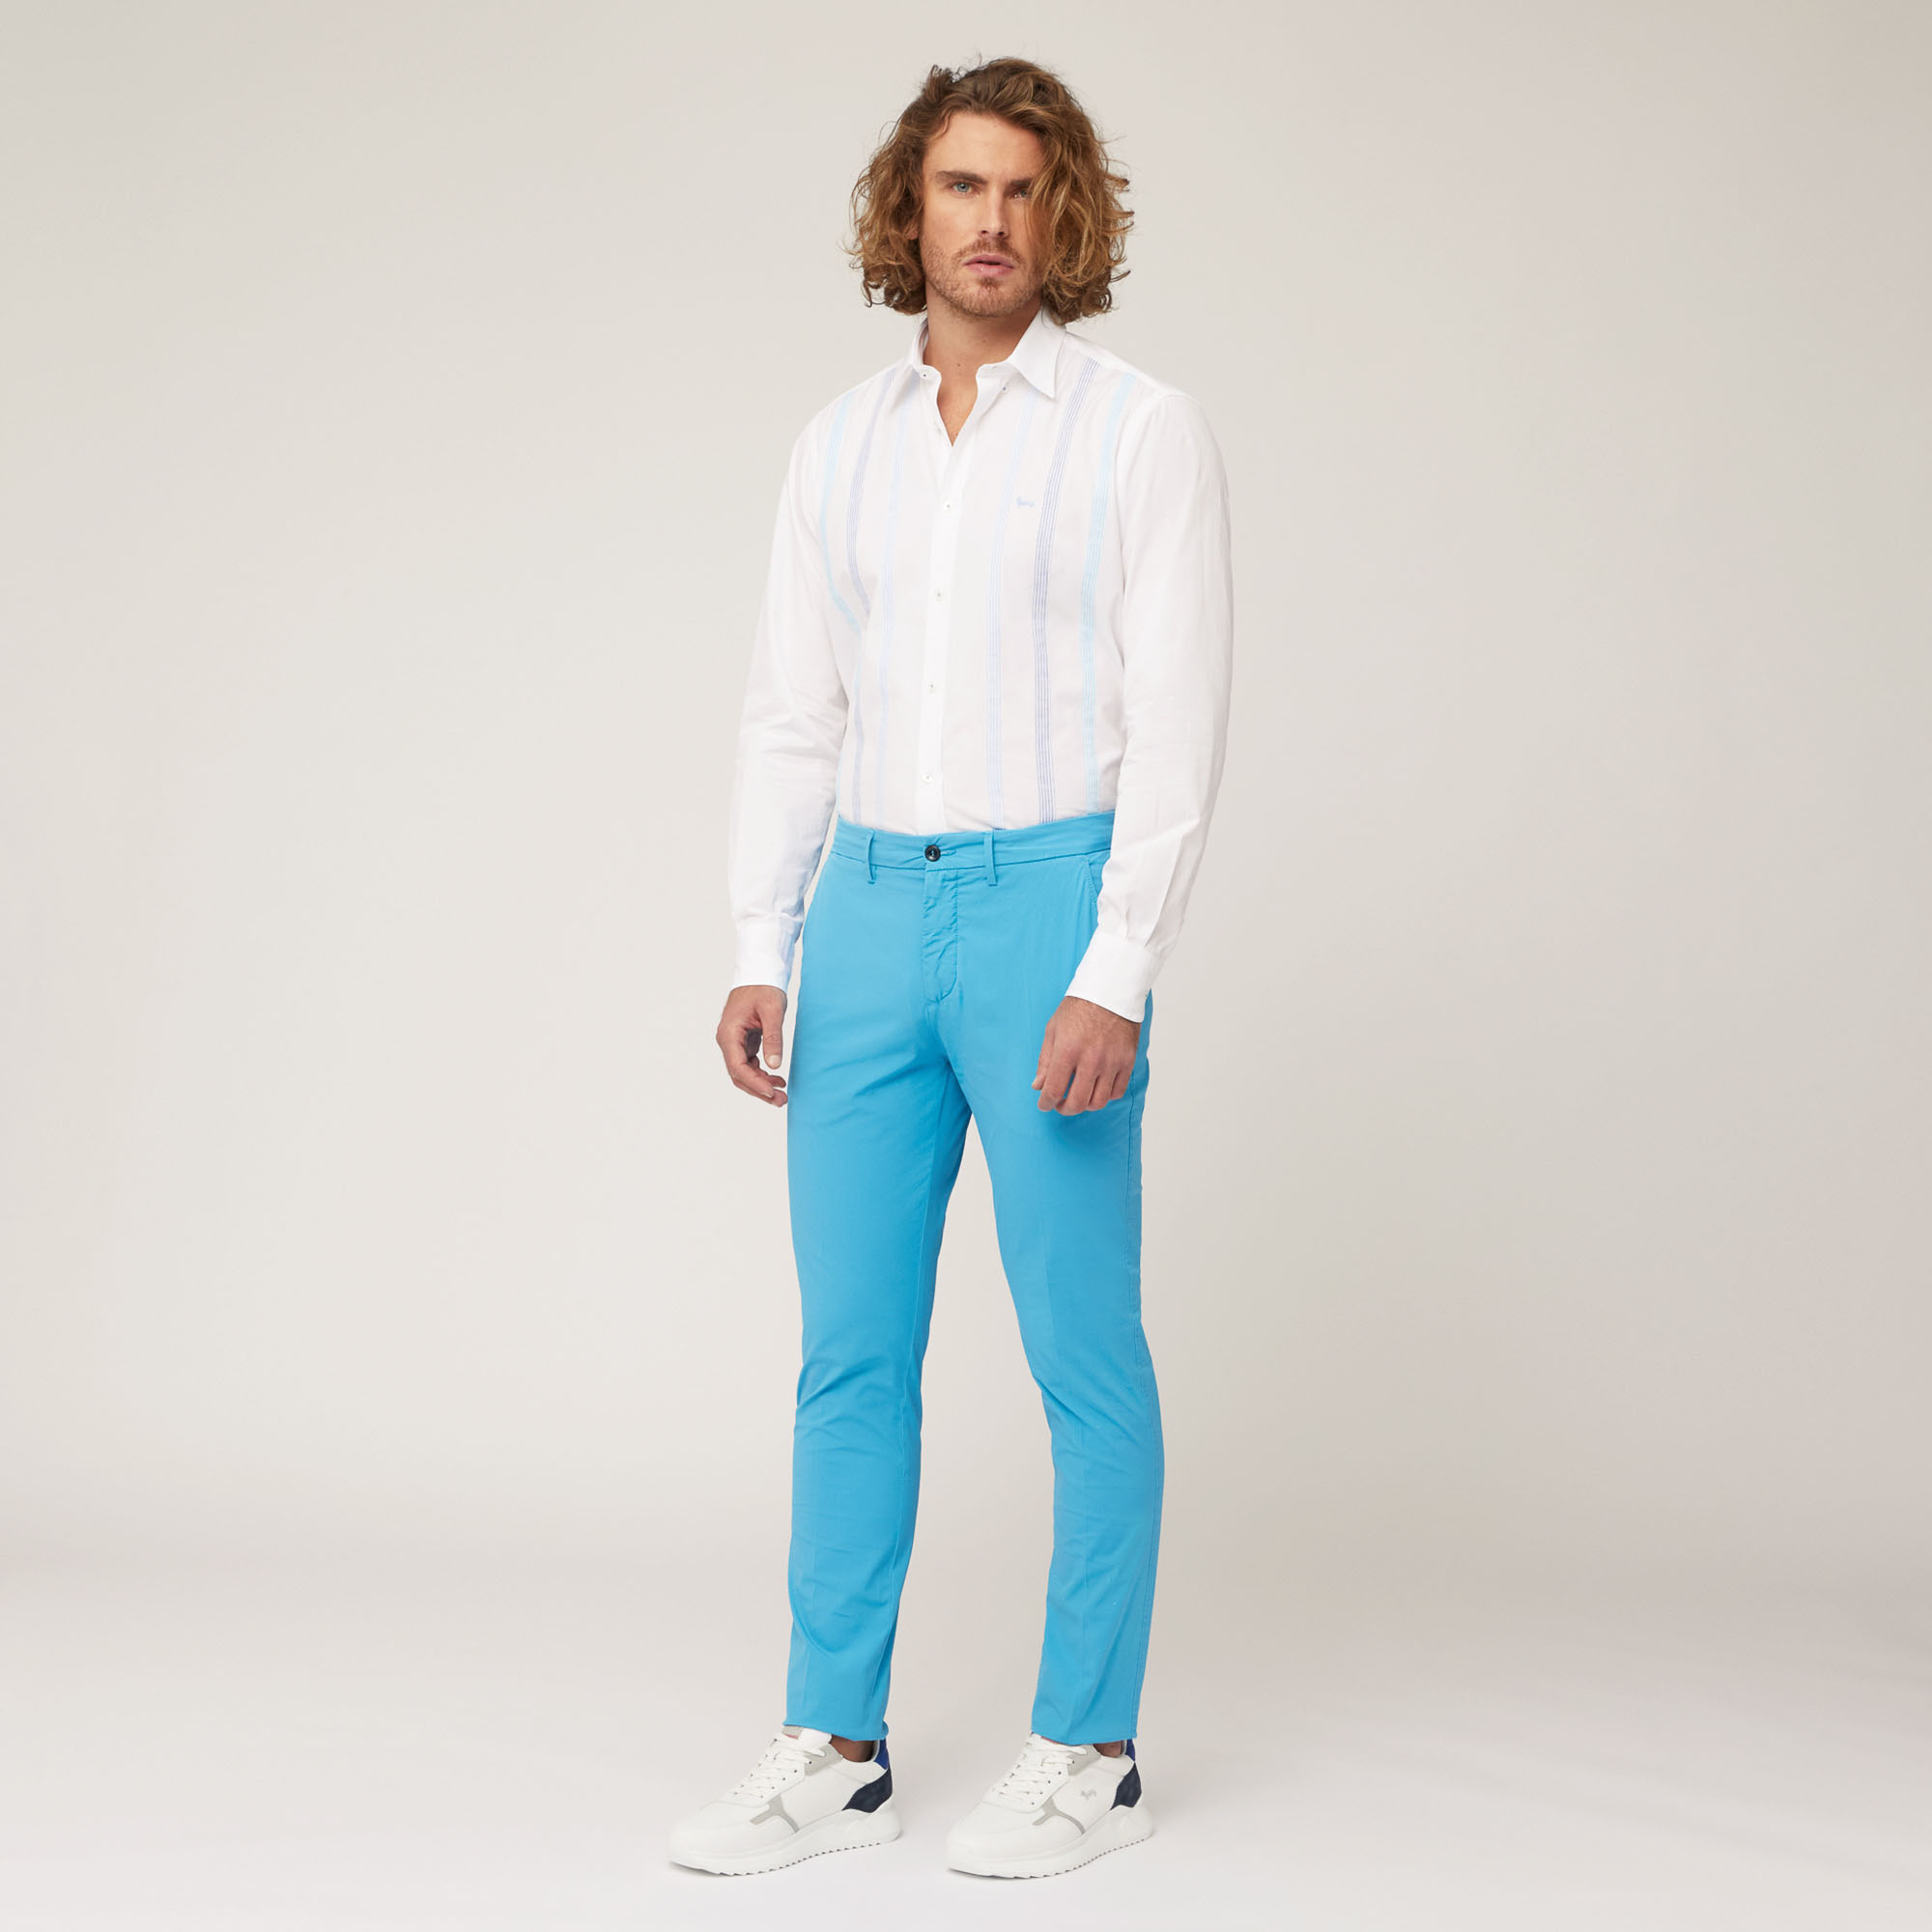 Narrow Fit Chino Pants, Light Blue, large image number 3